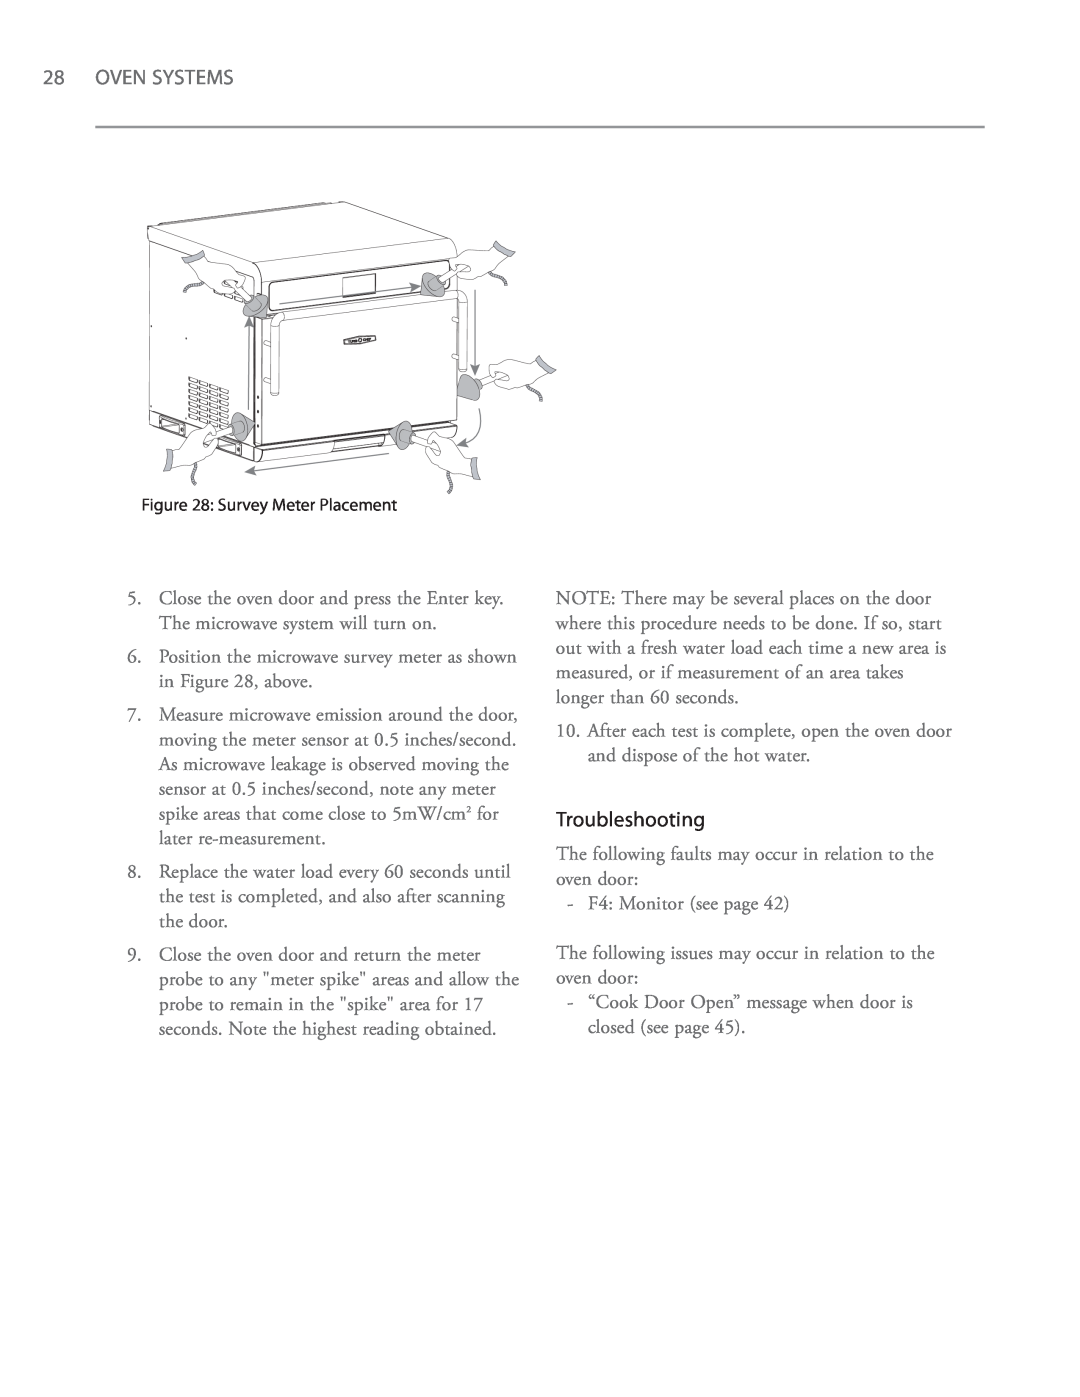 Turbo Chef Technologies i5 service manual Oven Systems, Troubleshooting 